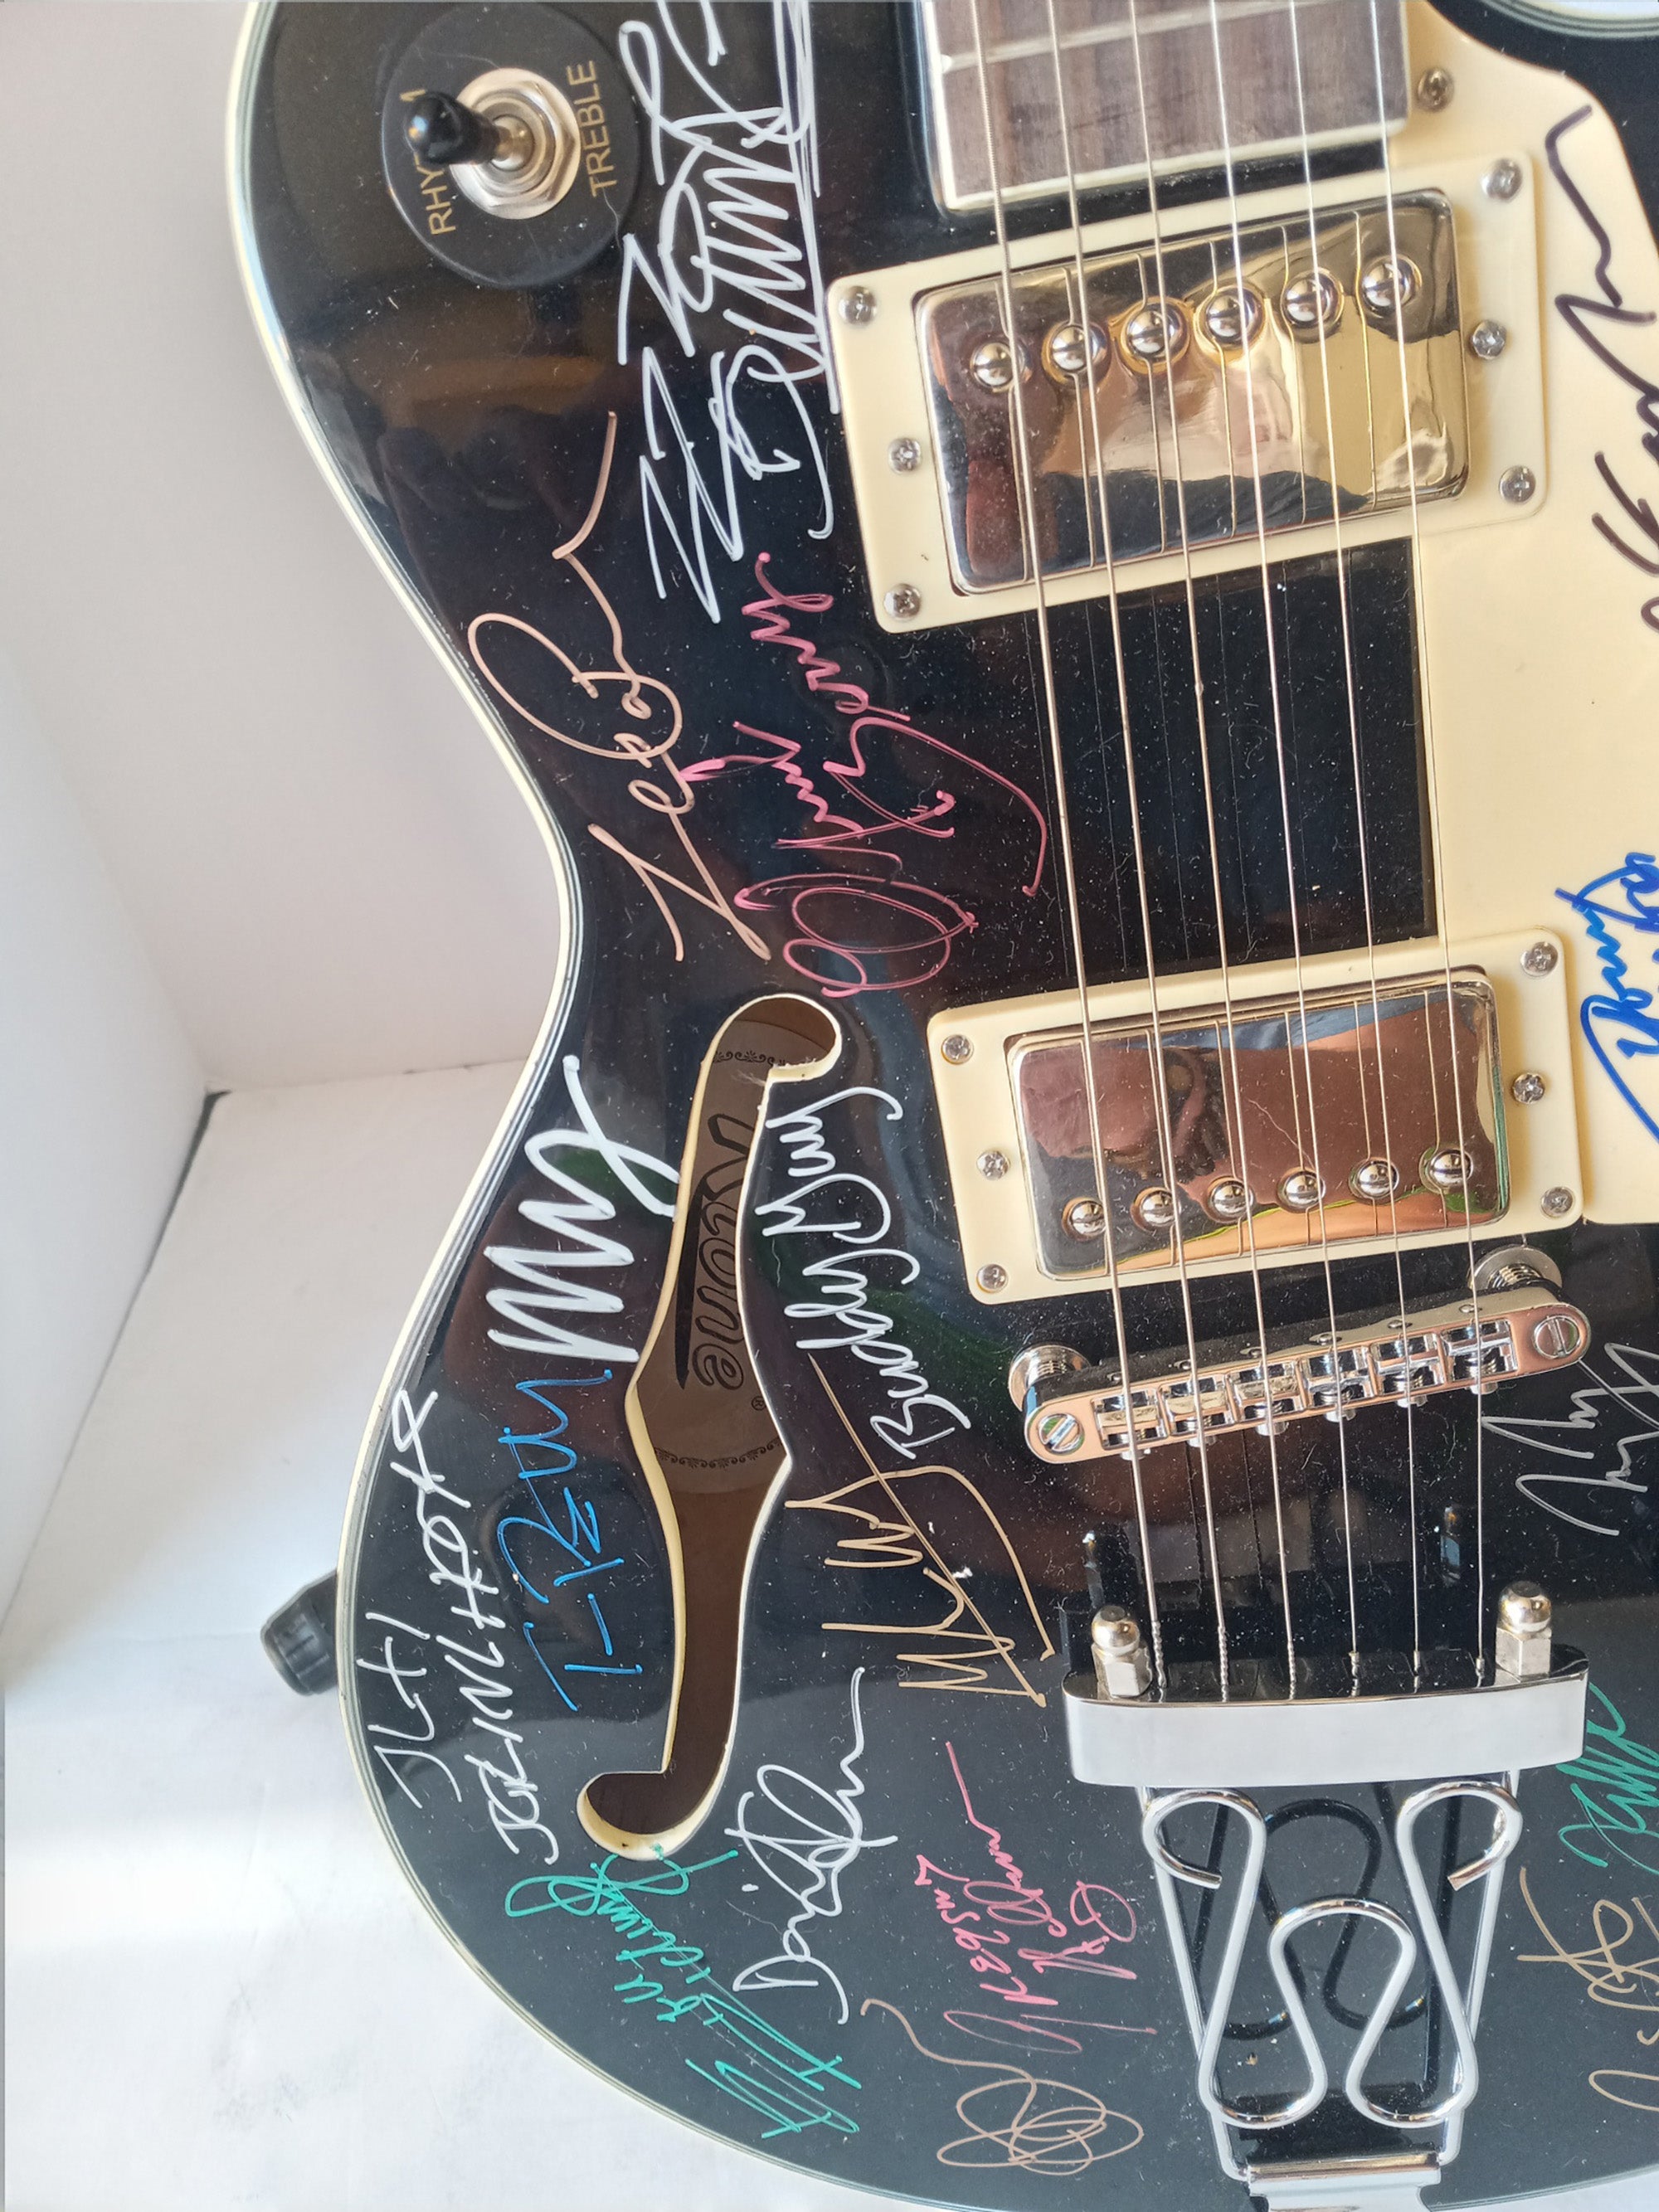 Paul McCartney, B.B. King, Eric Clapton, 22 Rock and Roll icons Les Paul hollow body guitar signed